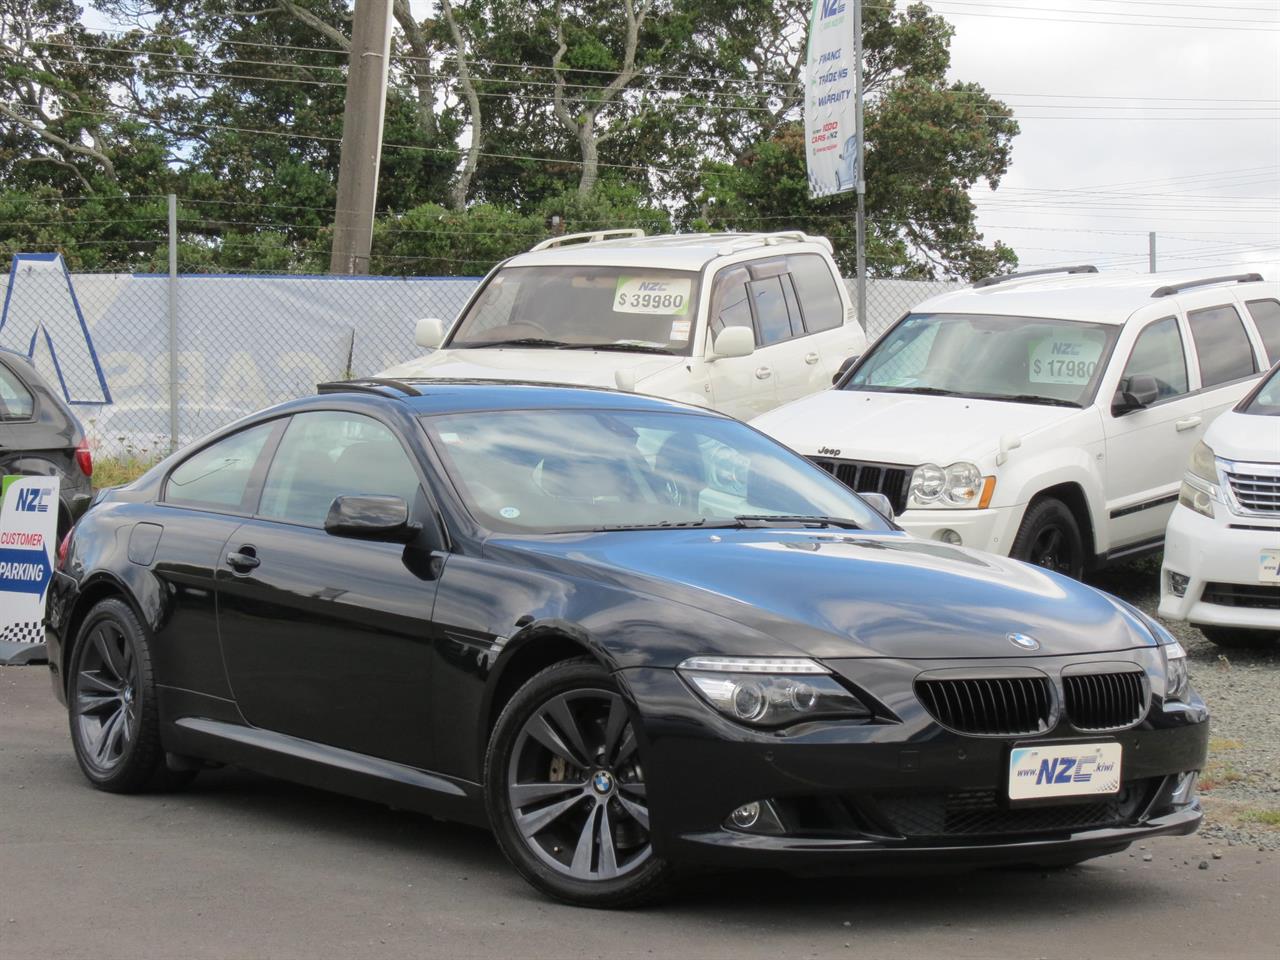 NZC 2010 BMW 650i just arrived to Auckland